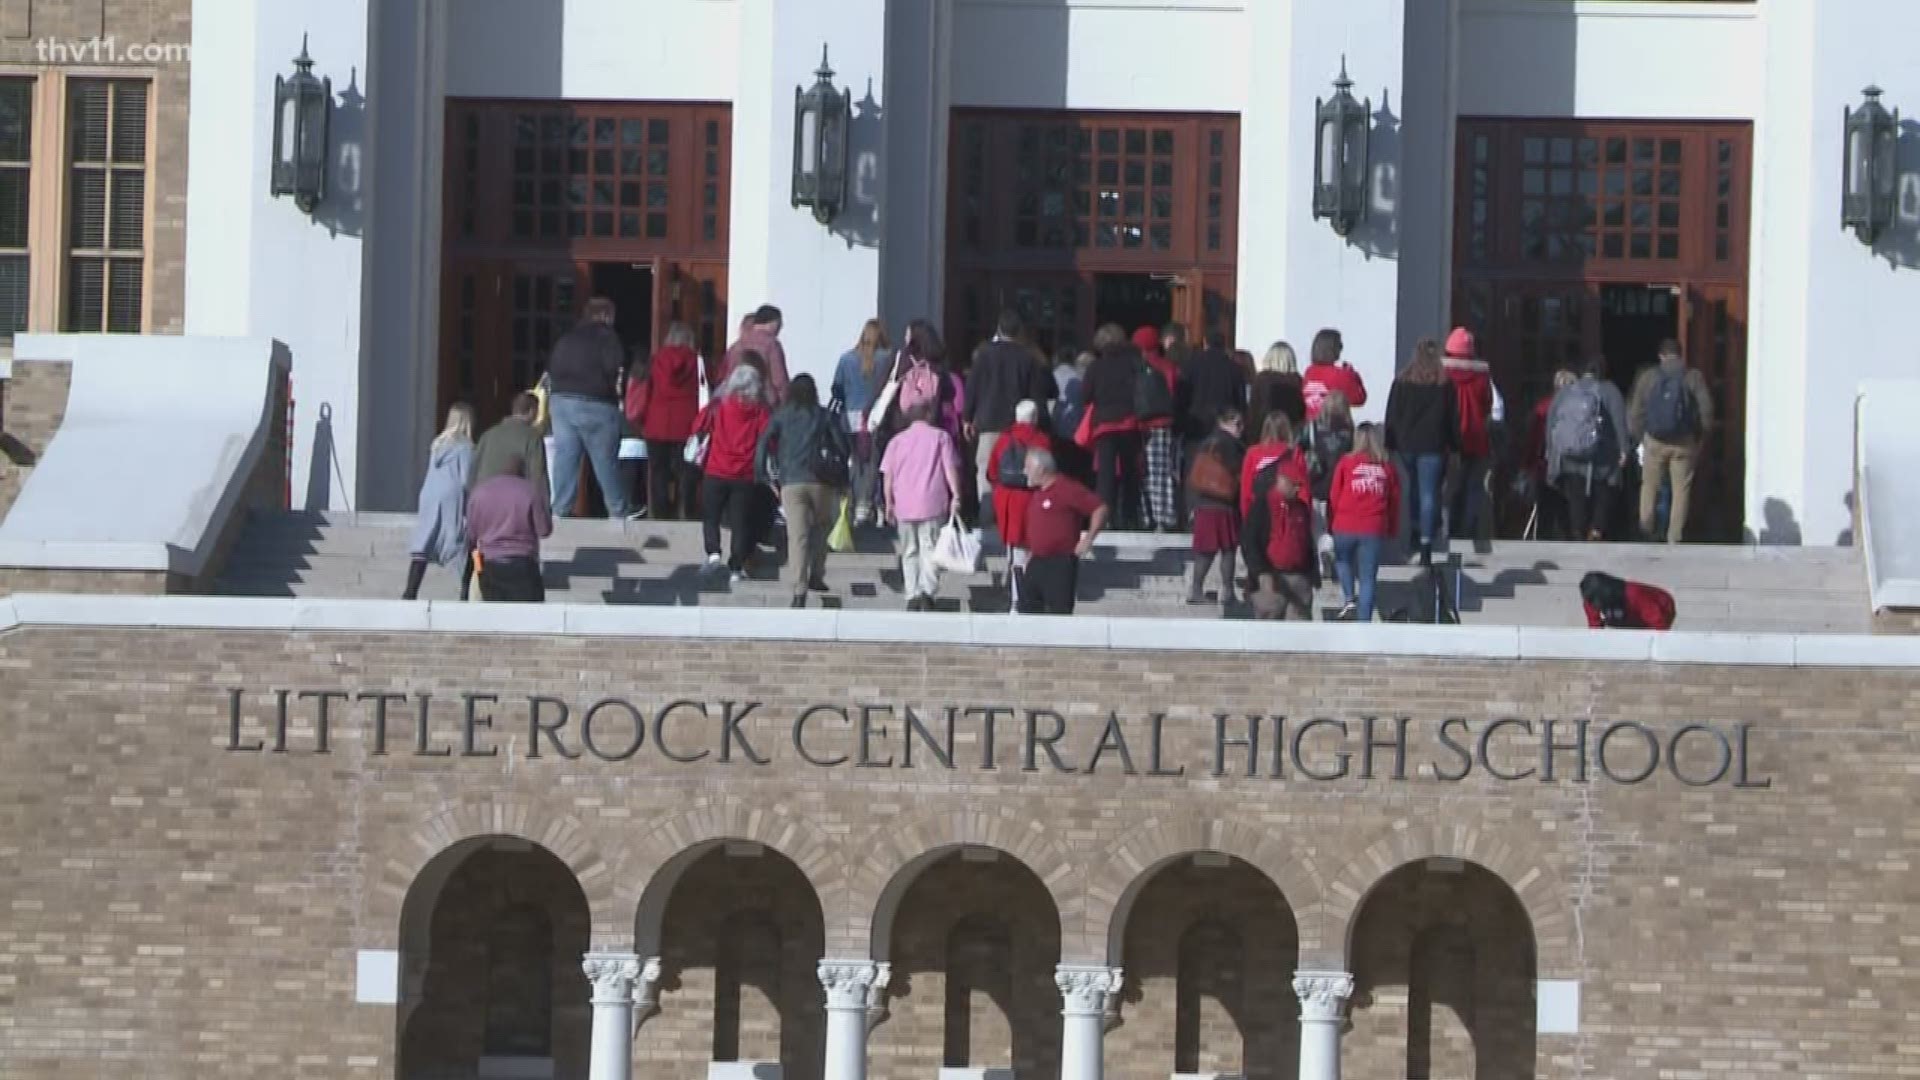 There's no strike and no work stoppage, but still plenty of unease as a new week begins in the Little Rock School District. Unionized teachers are trying to bargain.